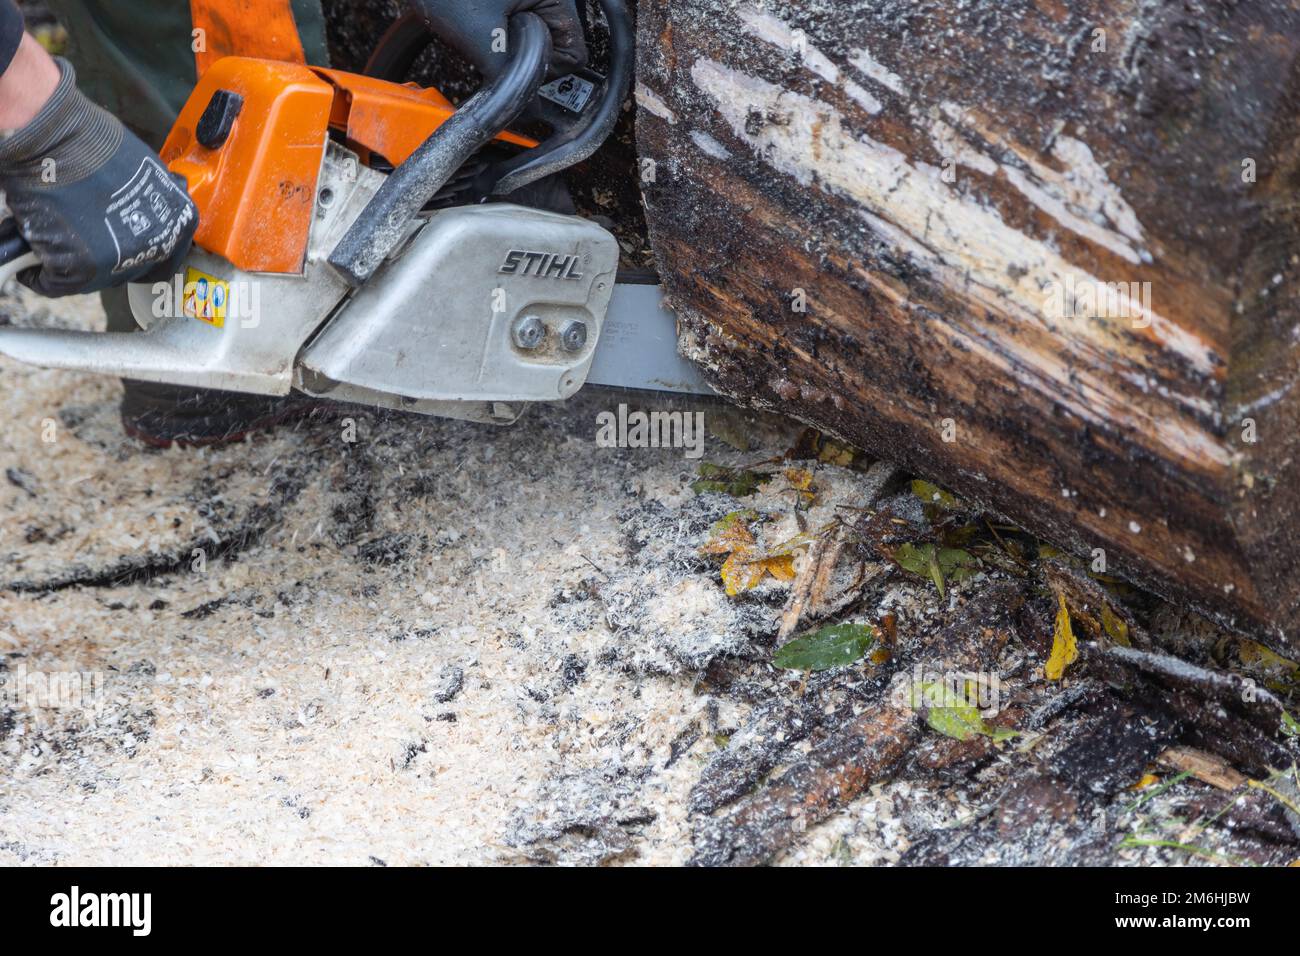 Neuwied, Germany - October 22, 2022: h a Stihl chain saw used to cut through a tree trunk lying on the ground. Stihl is a German manufacturer of chain Stock Photo